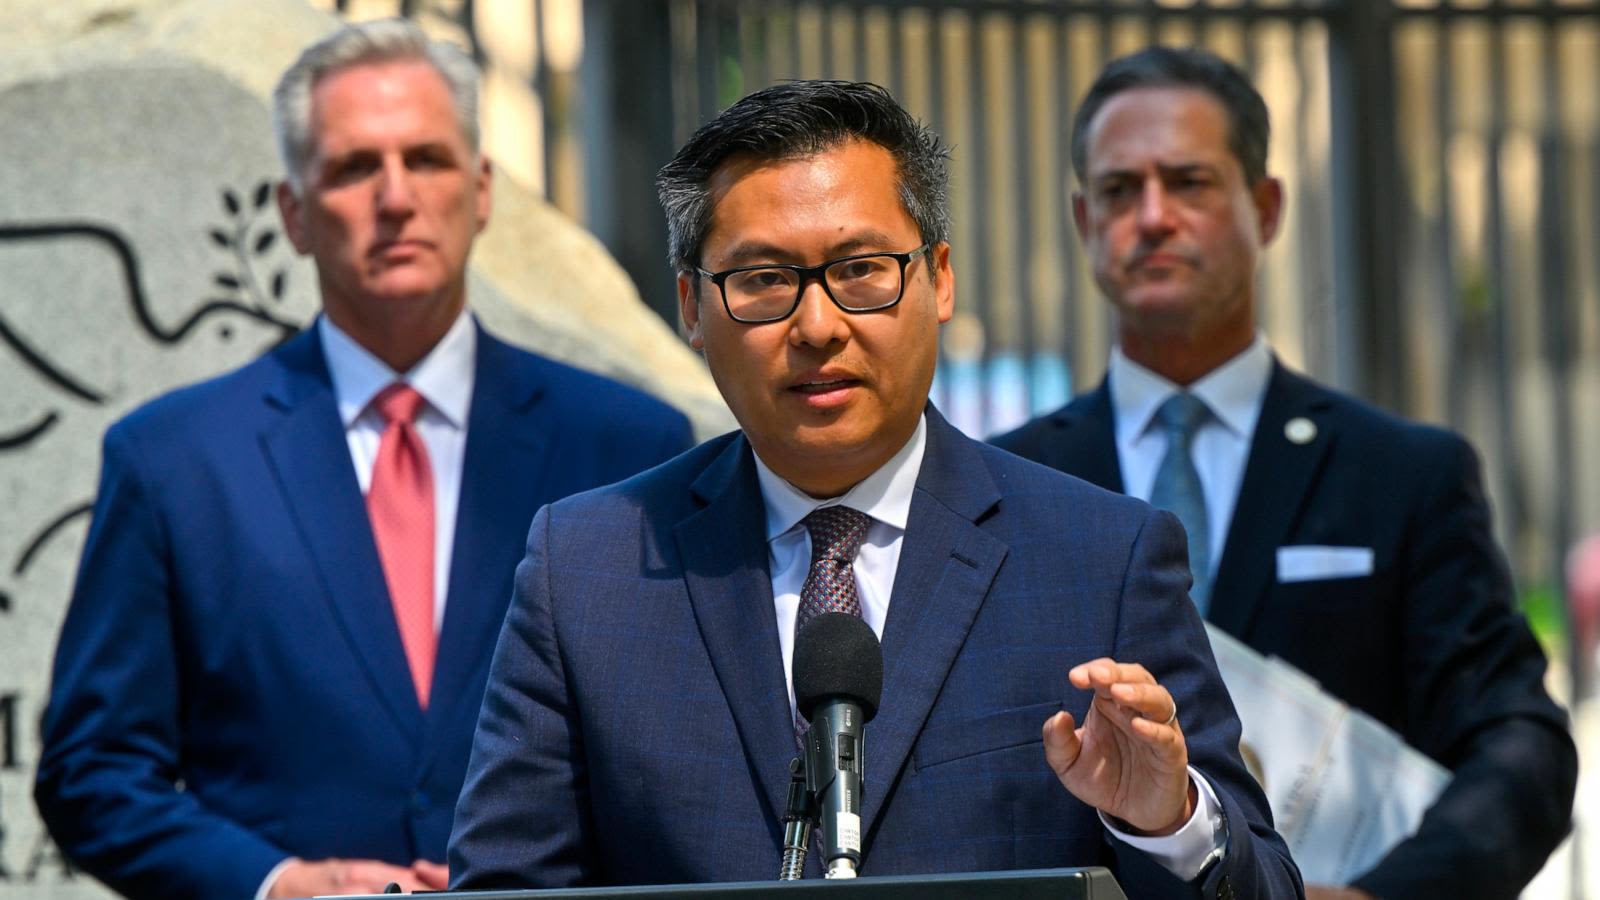 Vince Fong to take Kevin McCarthy's seat in Congress, bolstering GOP majority